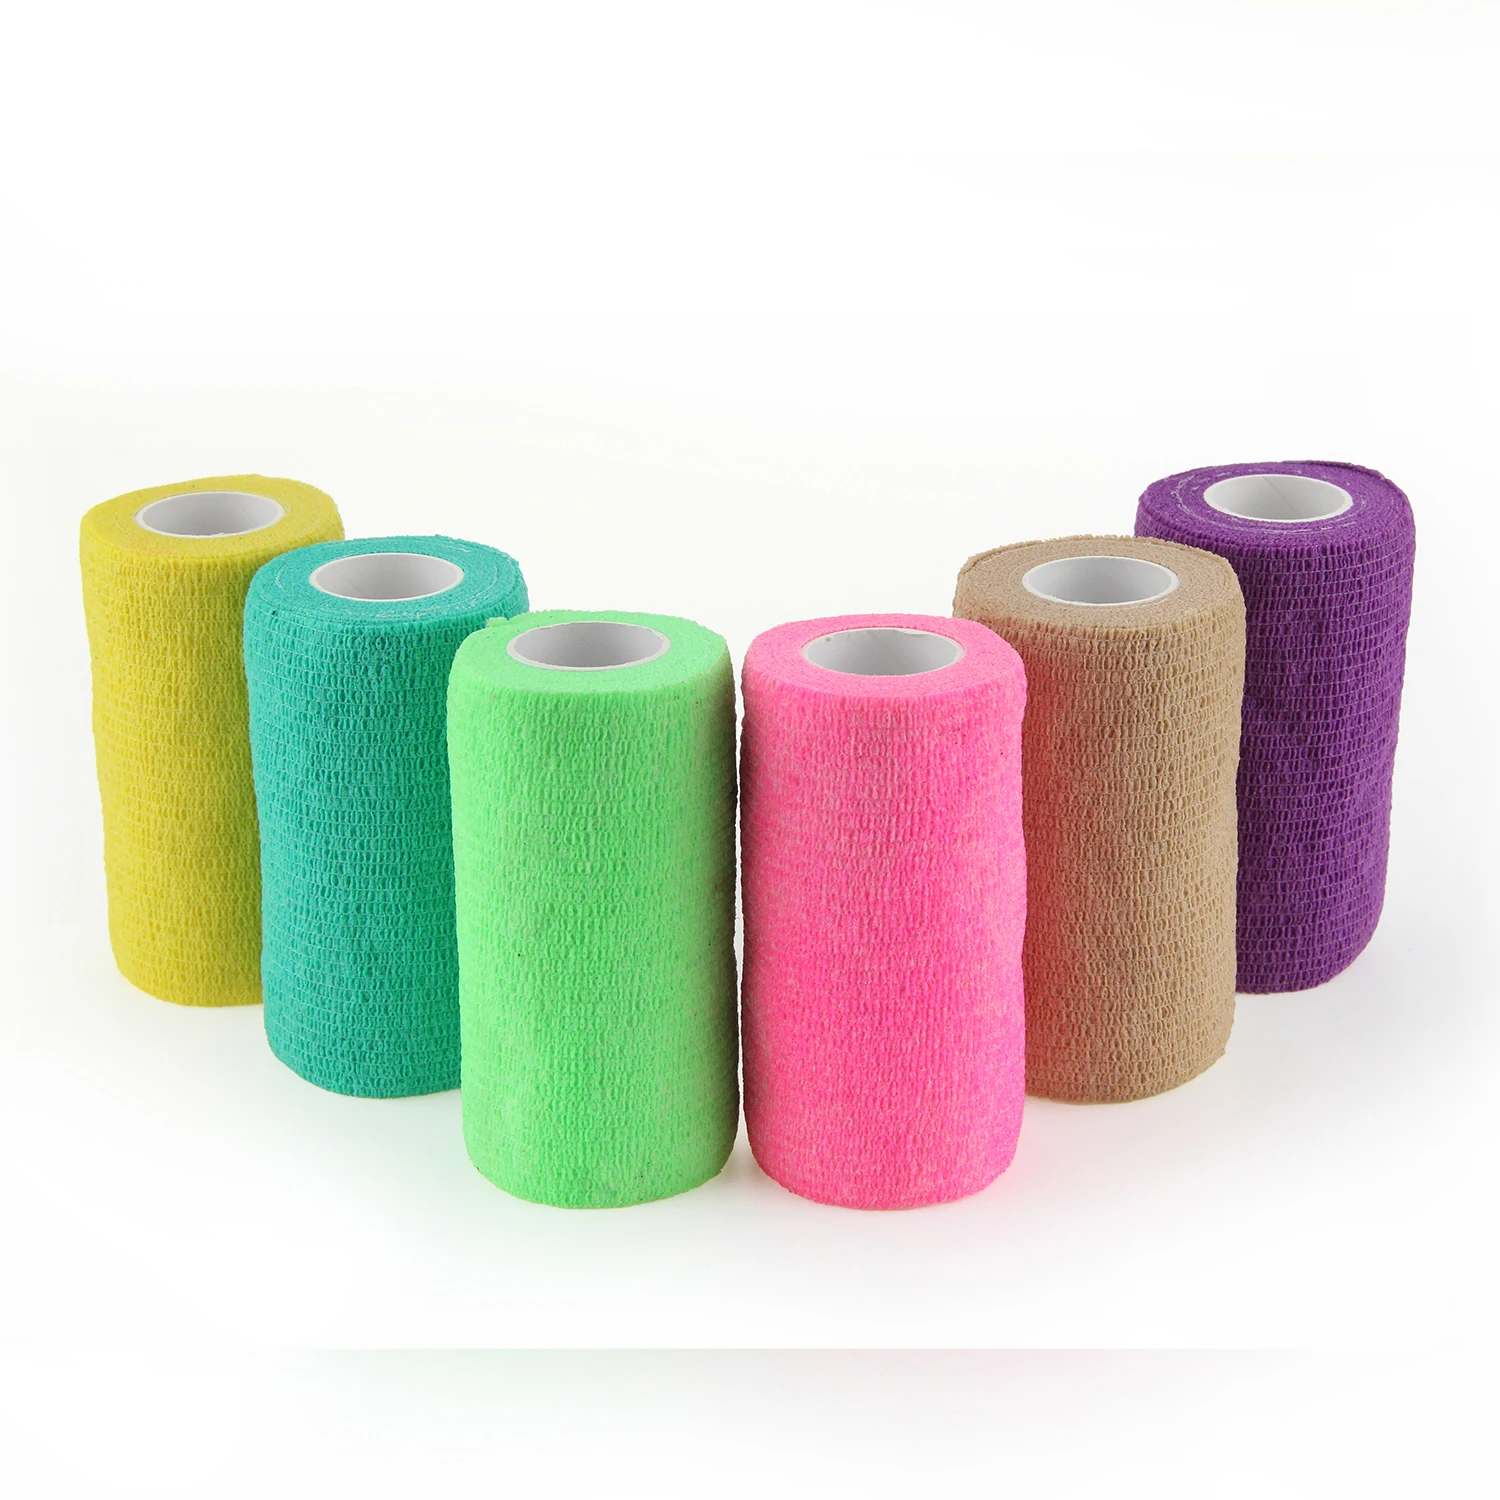 

Horse racing elastic cohesive bandages first aid tape dressing bandage rolls vet horse wrap, 18 colors available